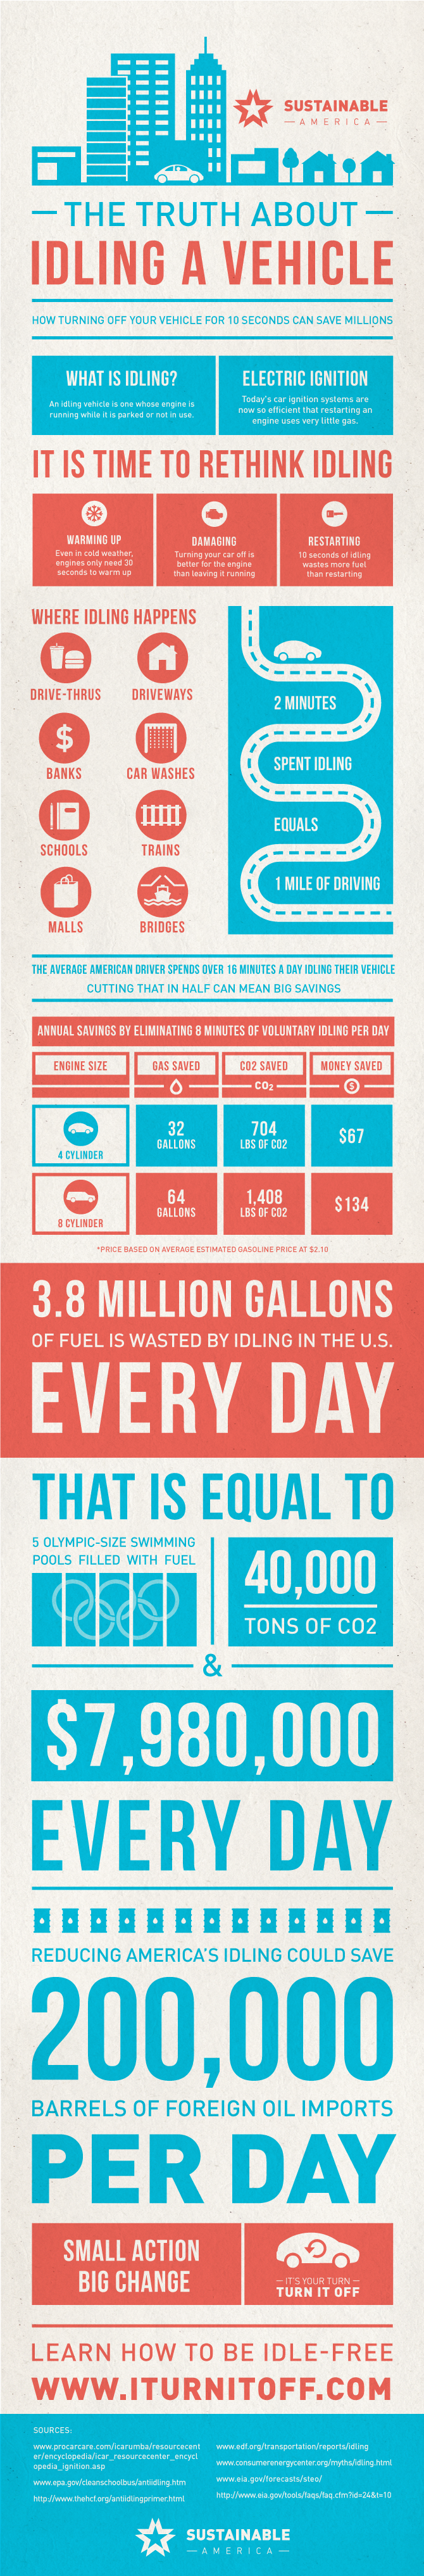 Idling_Infographic_01_update